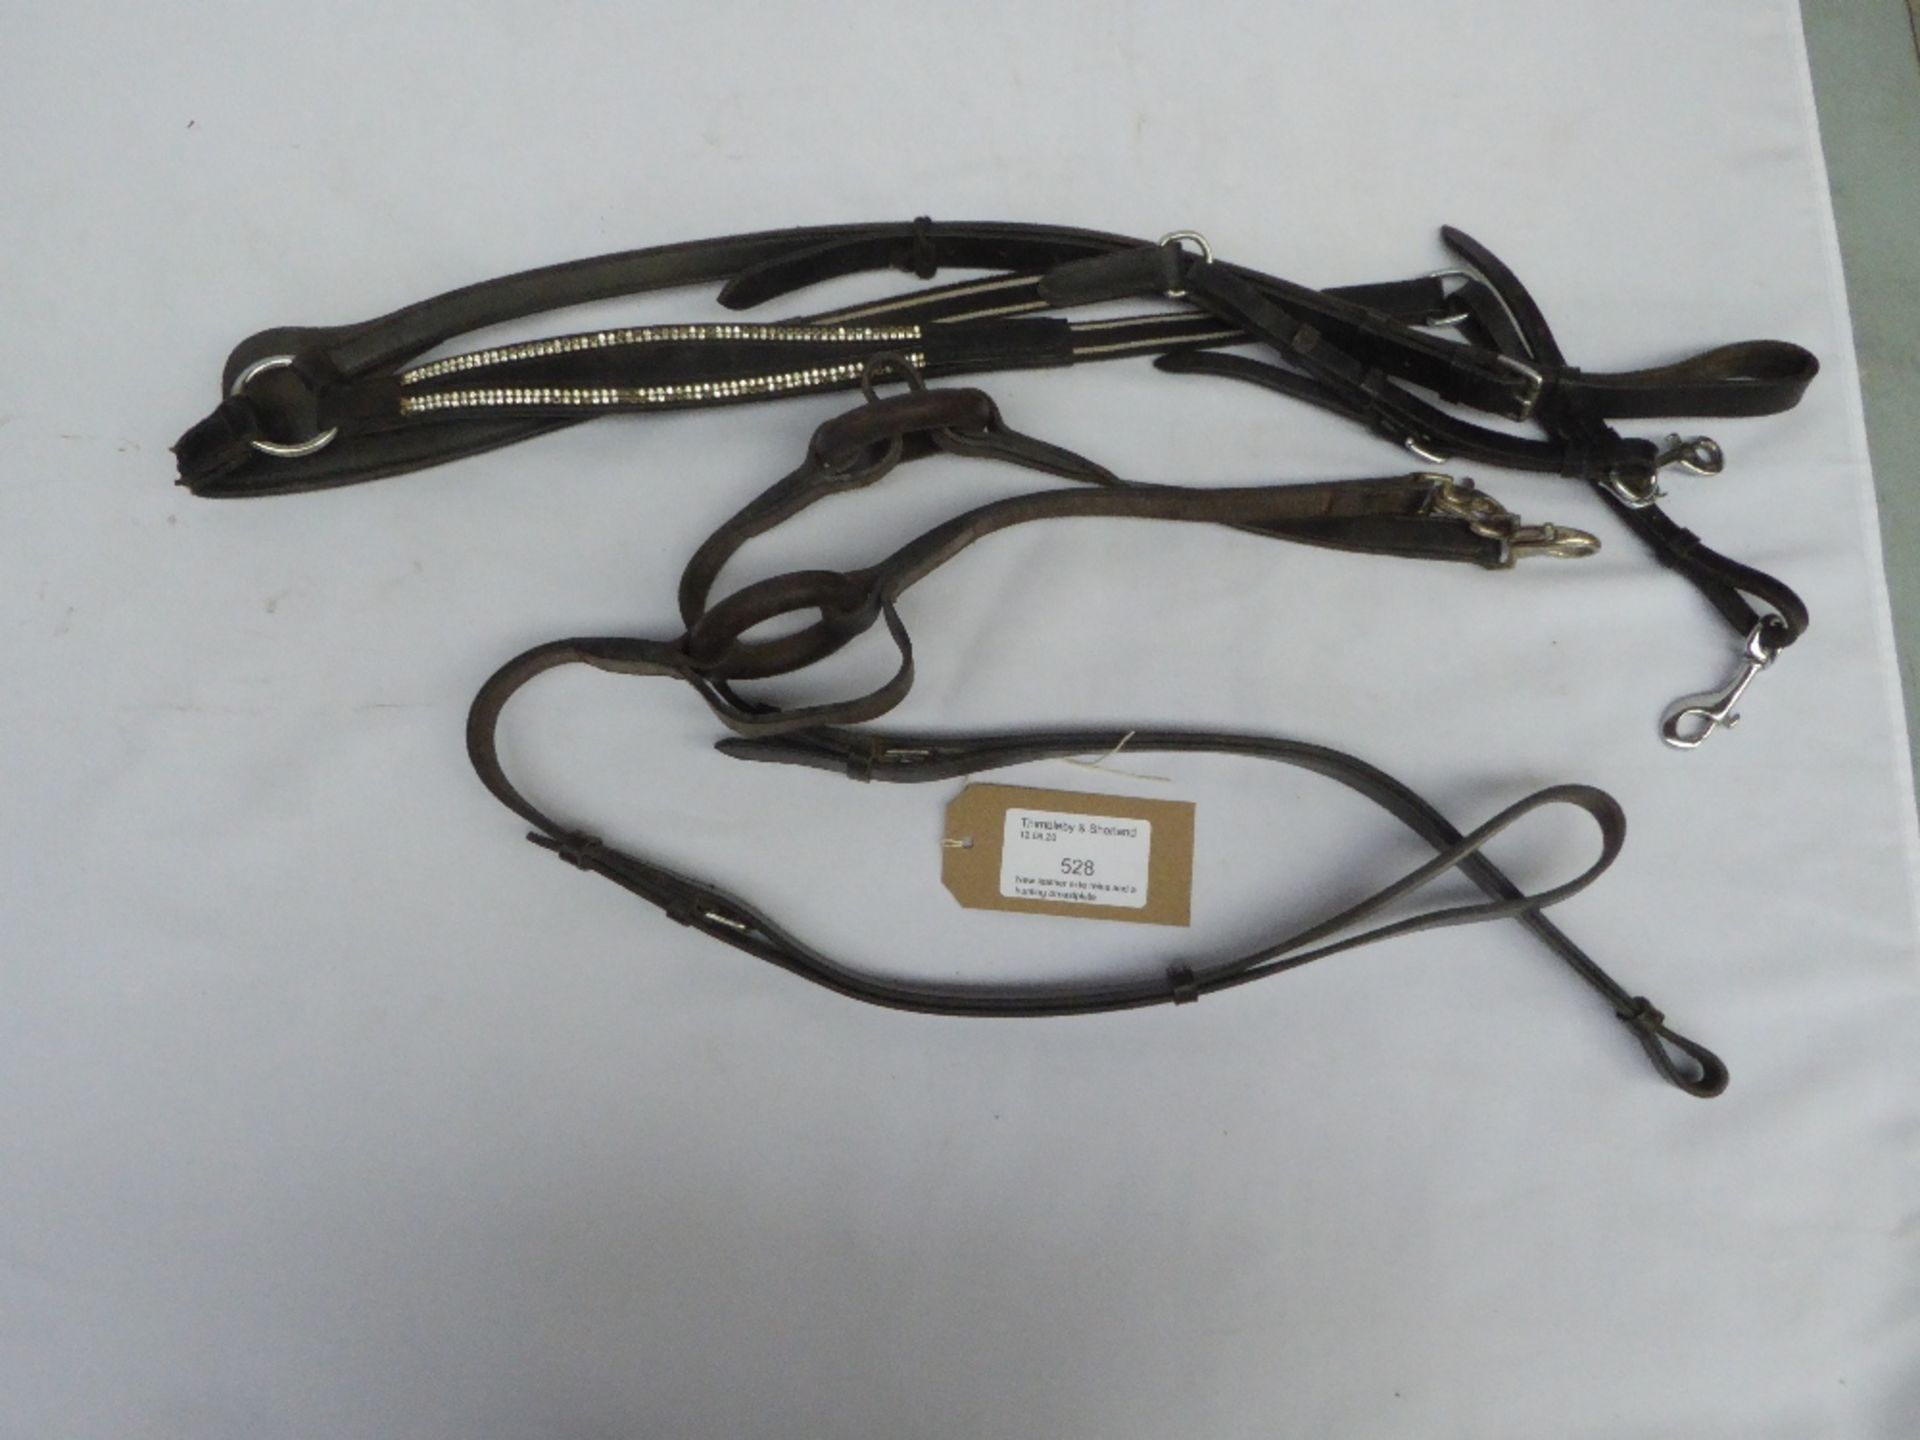 New leather side reins and a hunting breastplate - Image 2 of 2